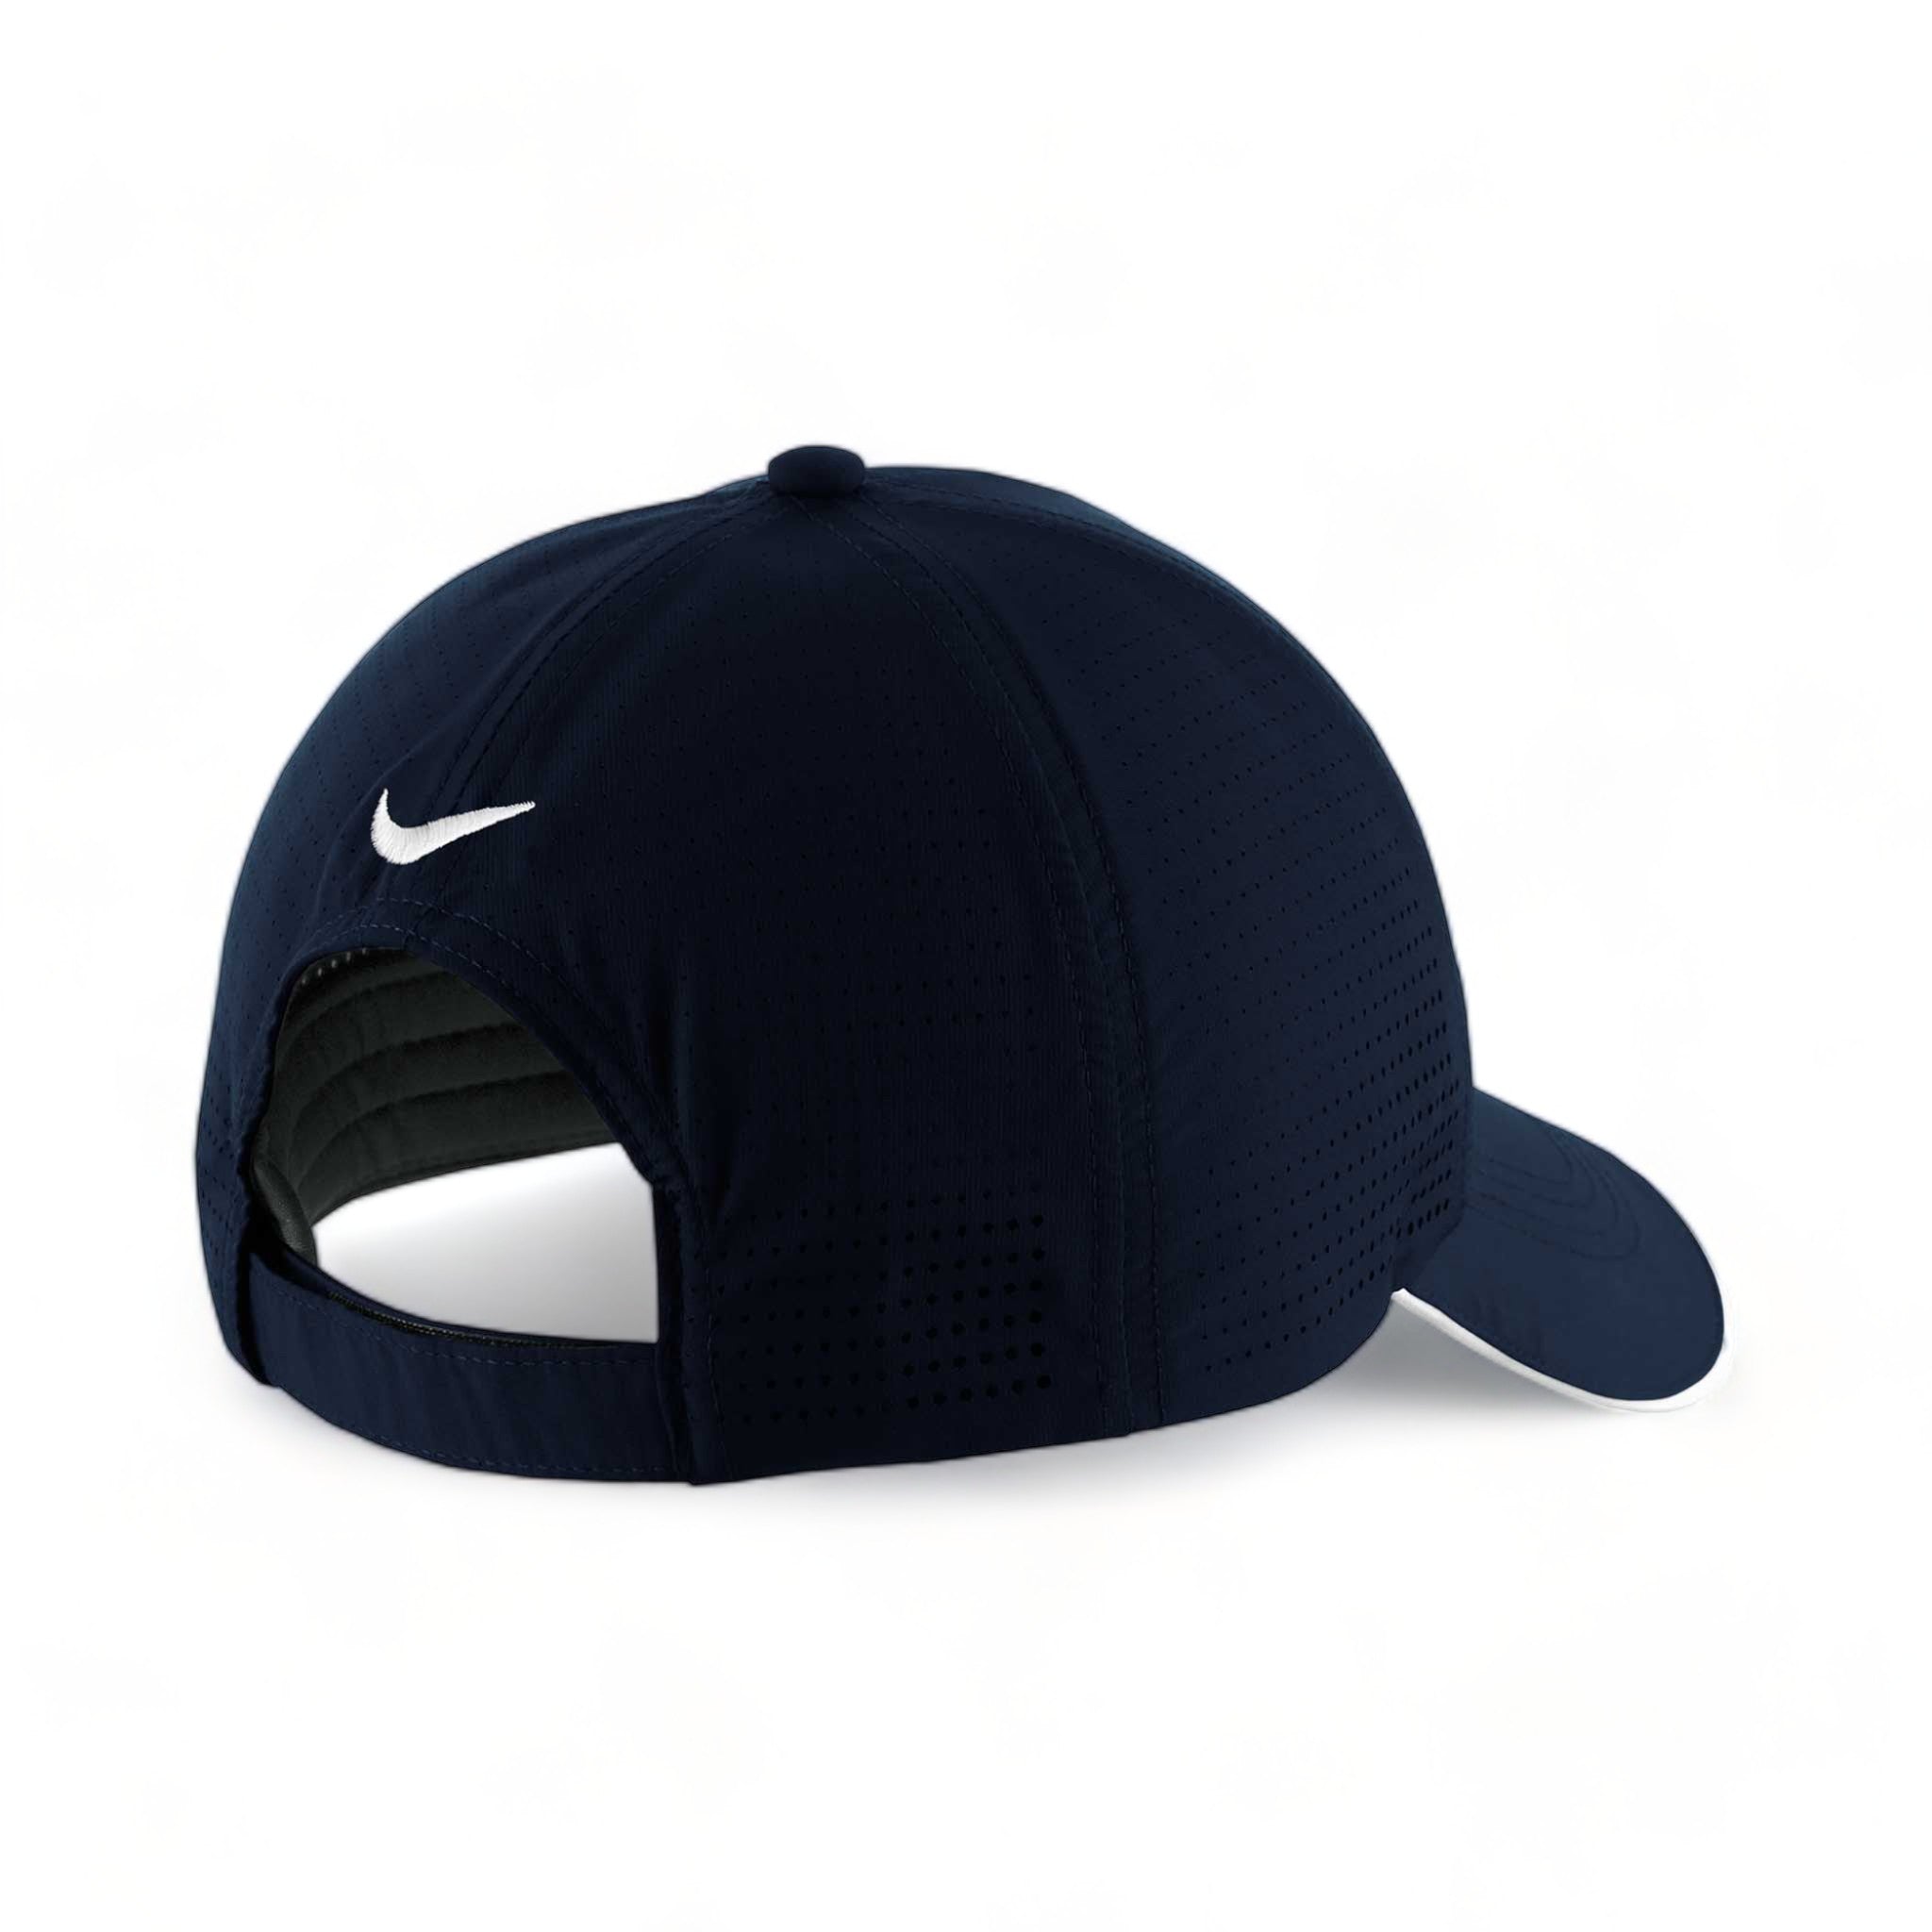 Back view of Nike NKFB6445 custom hat in navy and white